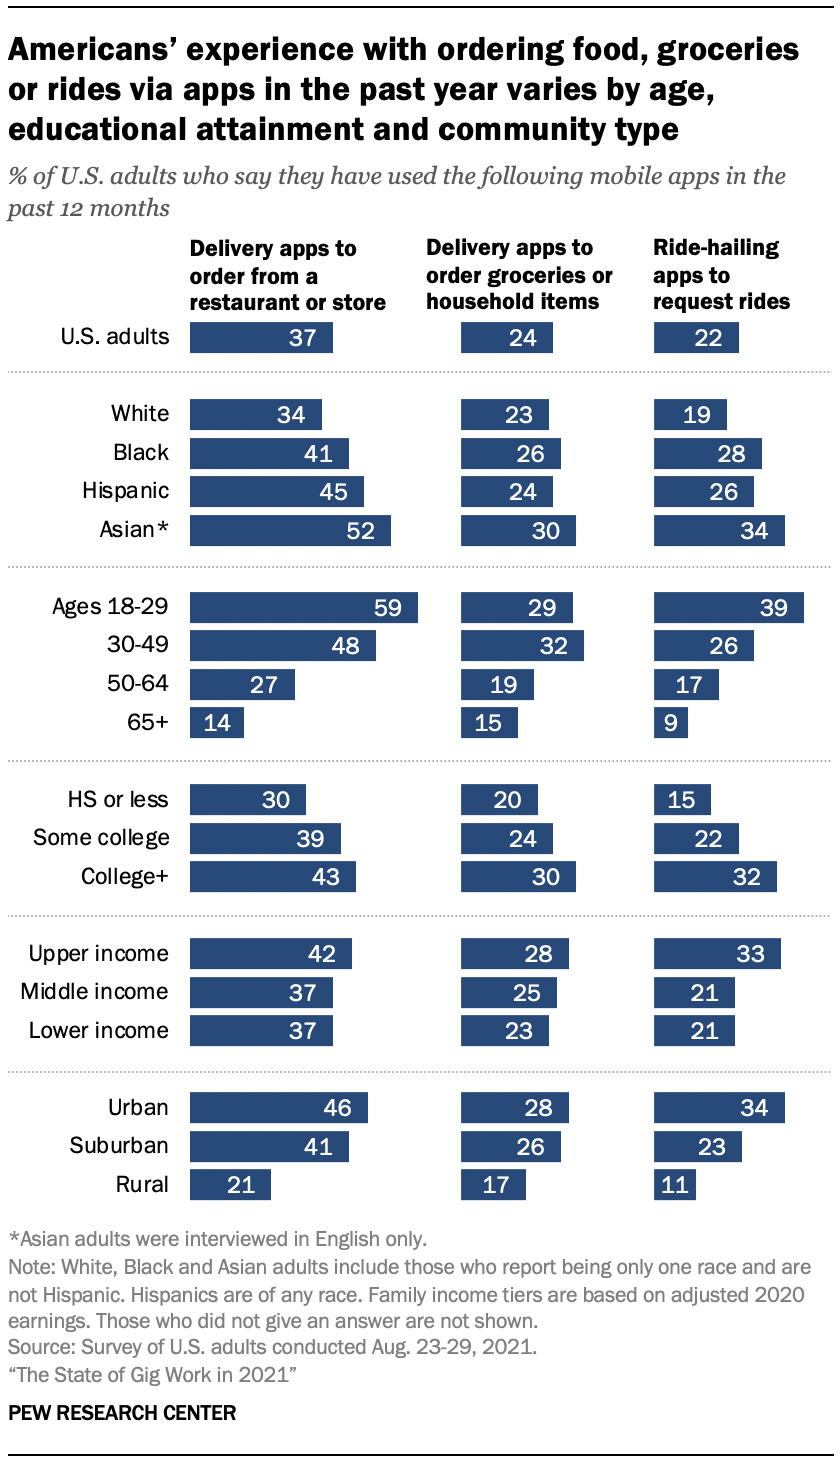 Americans’ experience with ordering food, groceries or rides via apps in the past year varies by age, educational attainment and community type